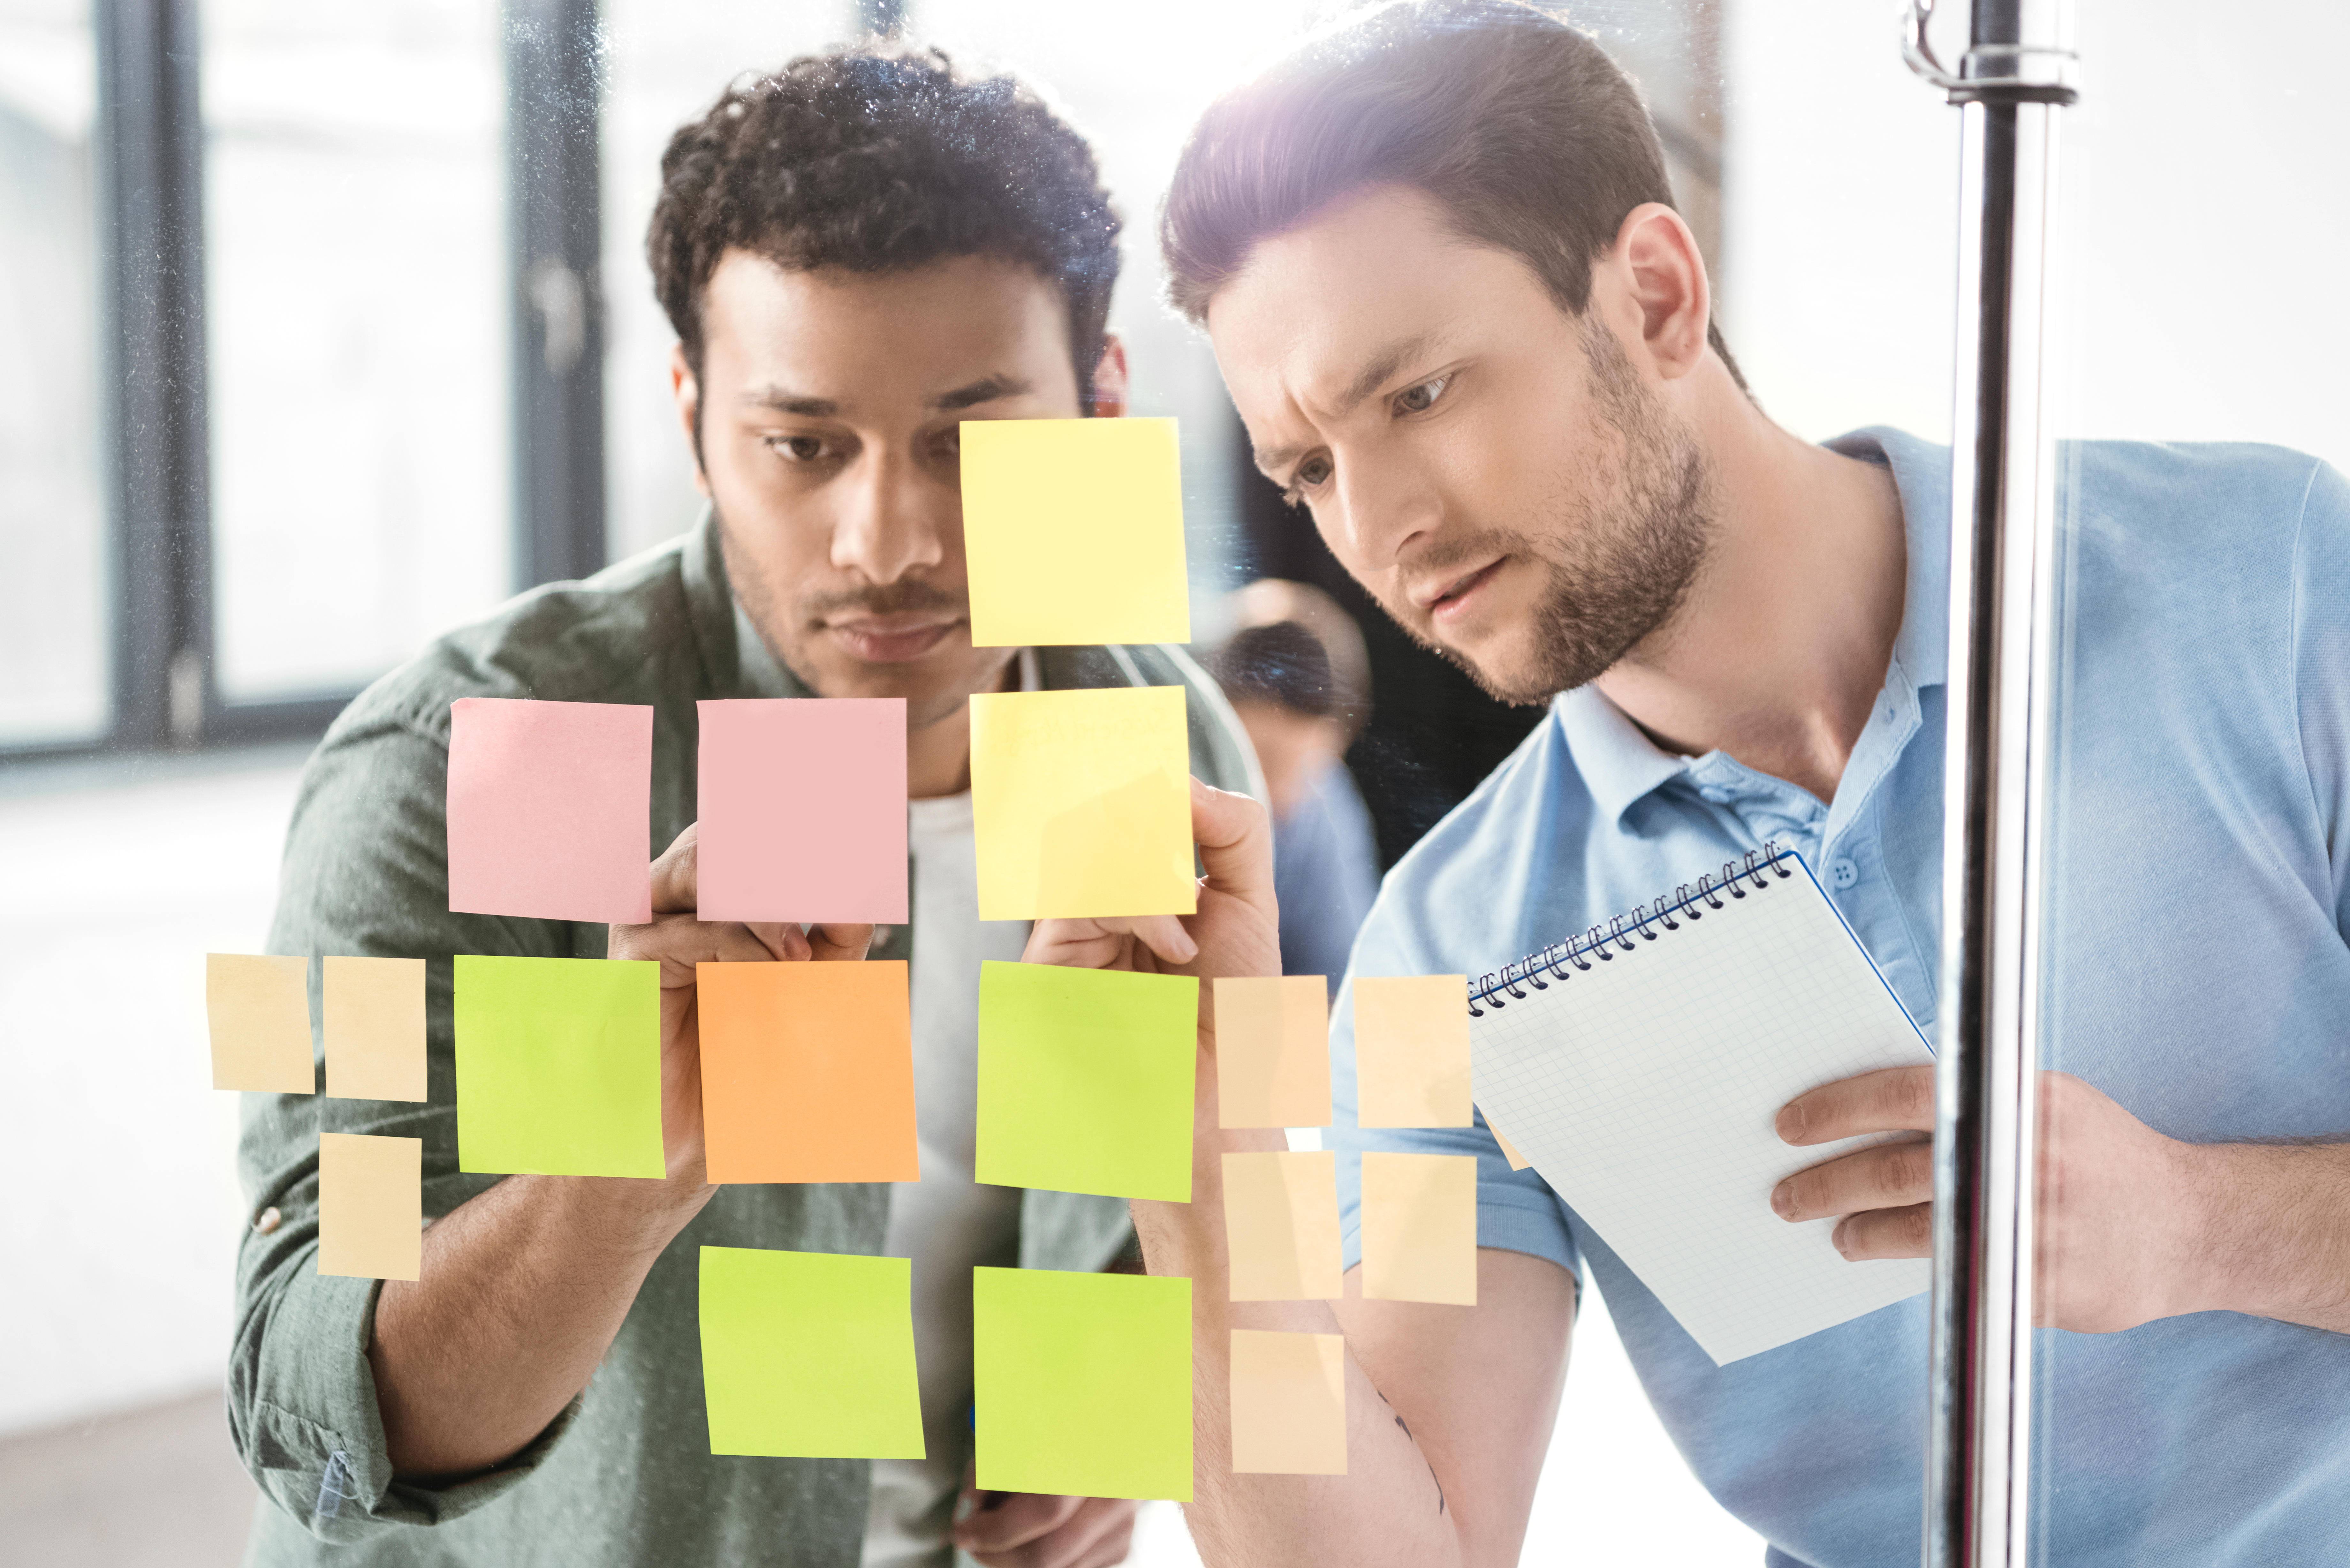 Depositphotos_152079742_xl-2015 (2 men working with post its)-1